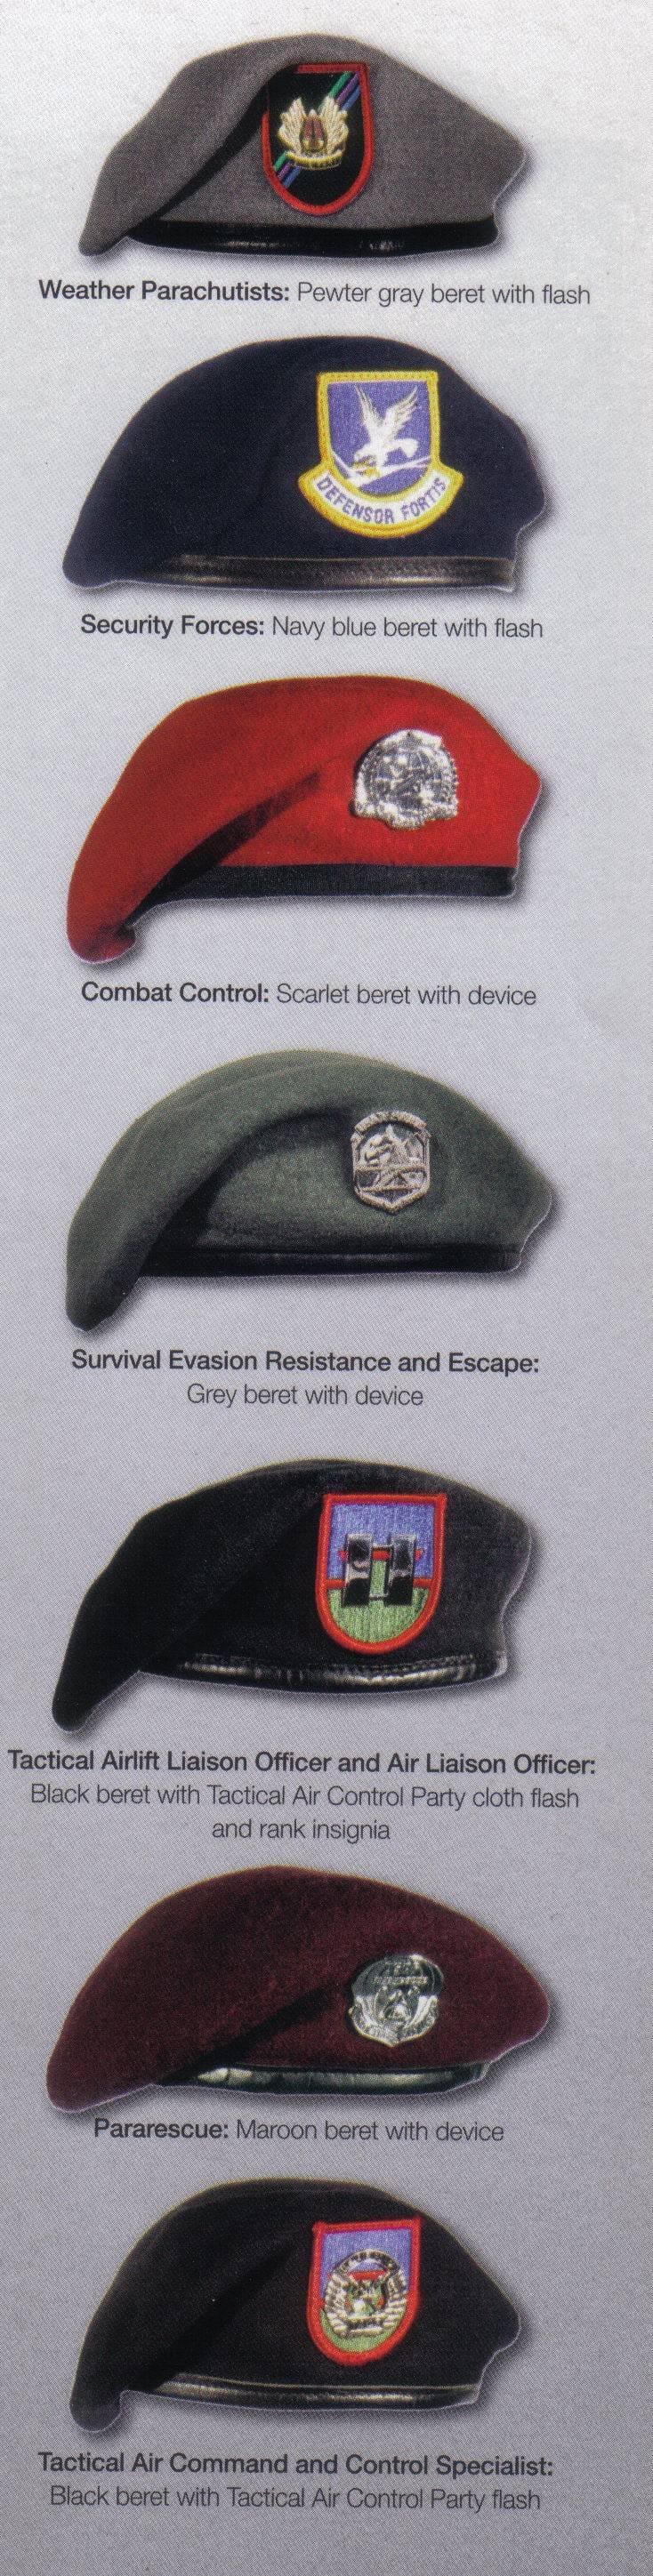 Decoding Those Air Force Berets Soldier Systems Daily, 56% OFF